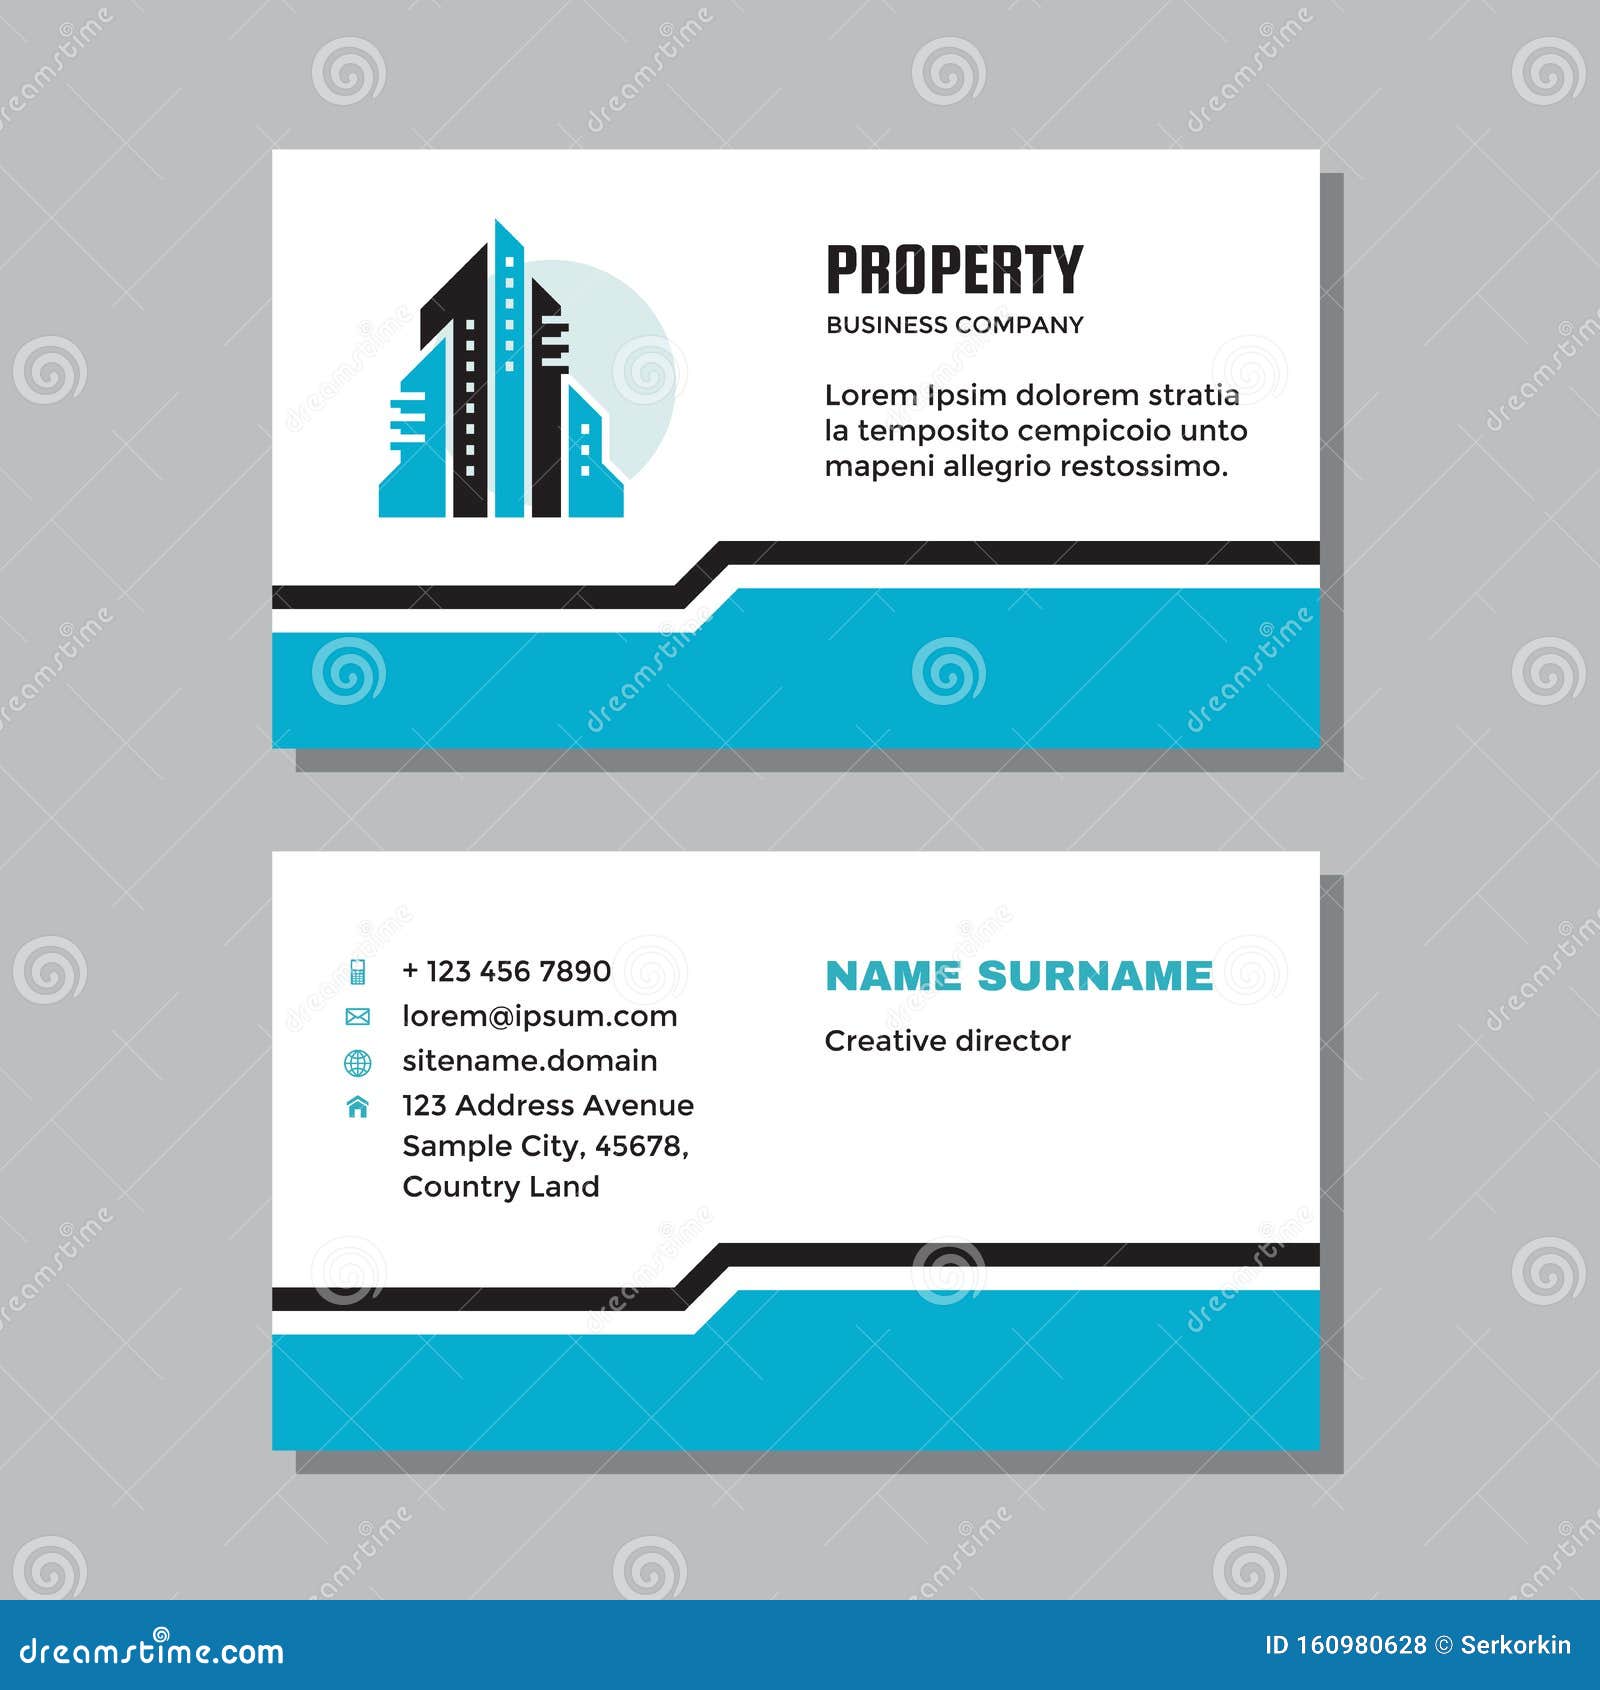 Business Visit Card Template with Logo - Concept Design. Real Intended For Transport Business Cards Templates Free